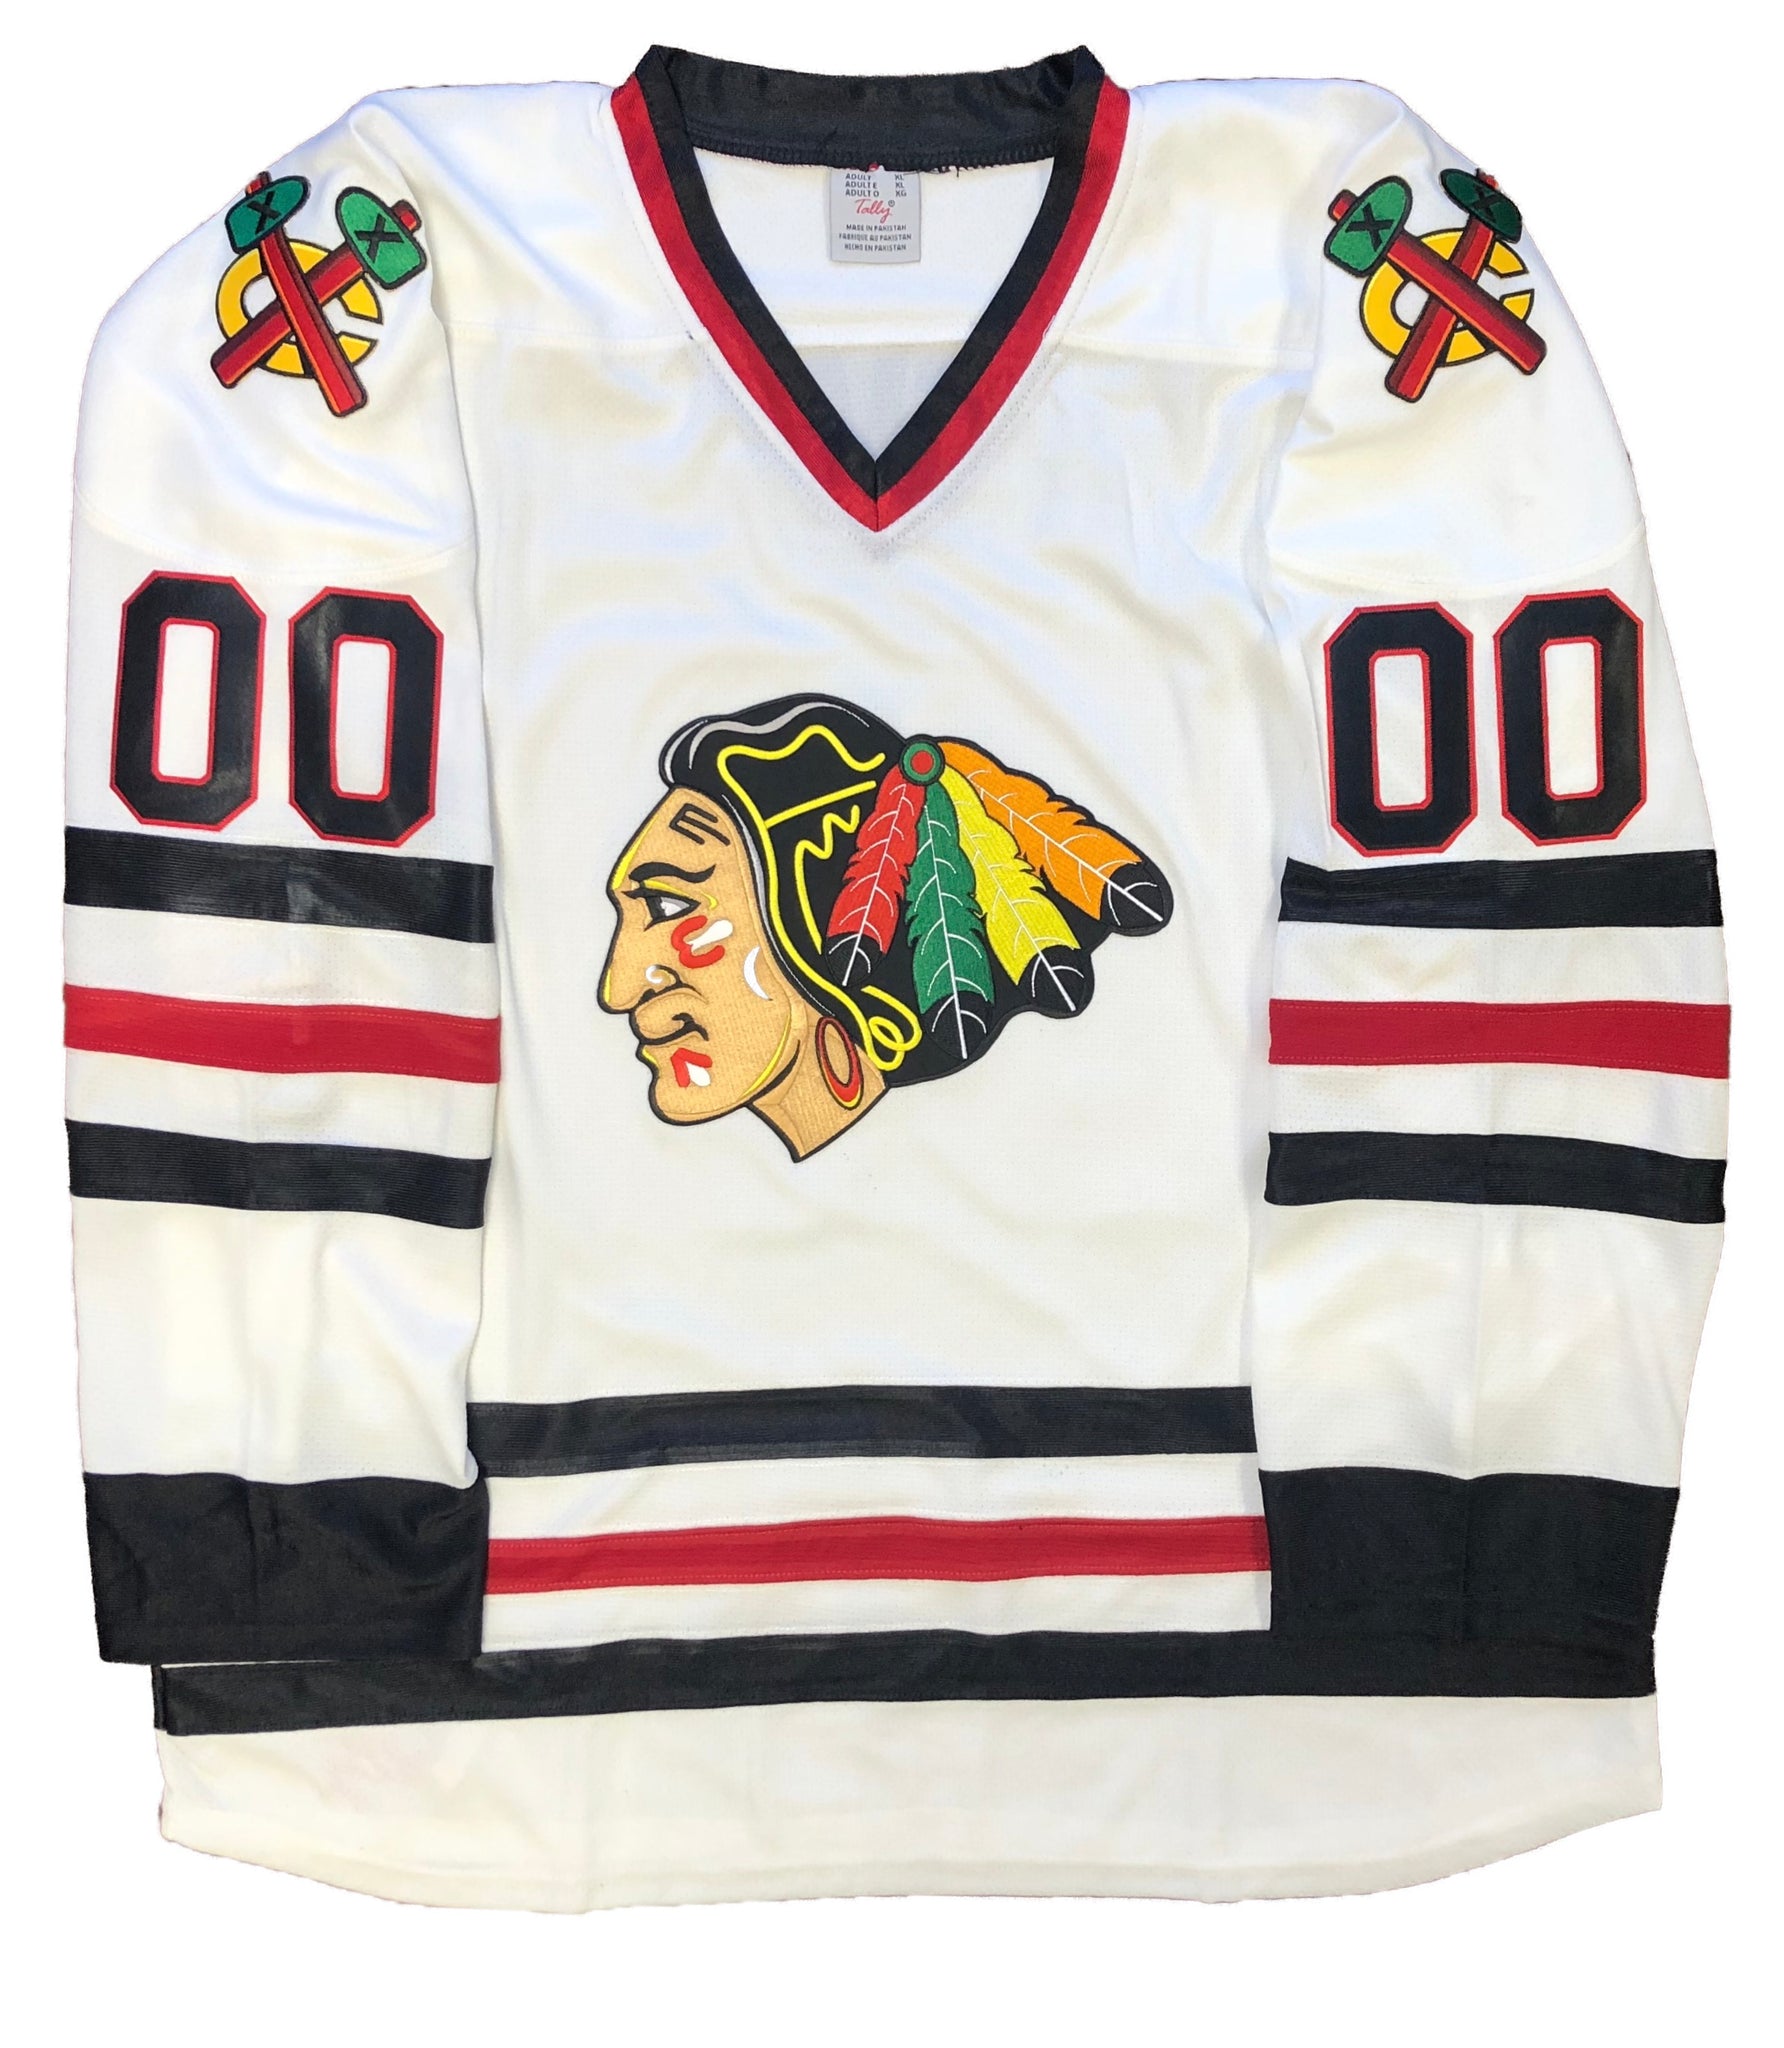 Tally Hockey Jerseys Griswold Jersey with Embroidered Twill Crests and Sleeve Numbers Adult Medium